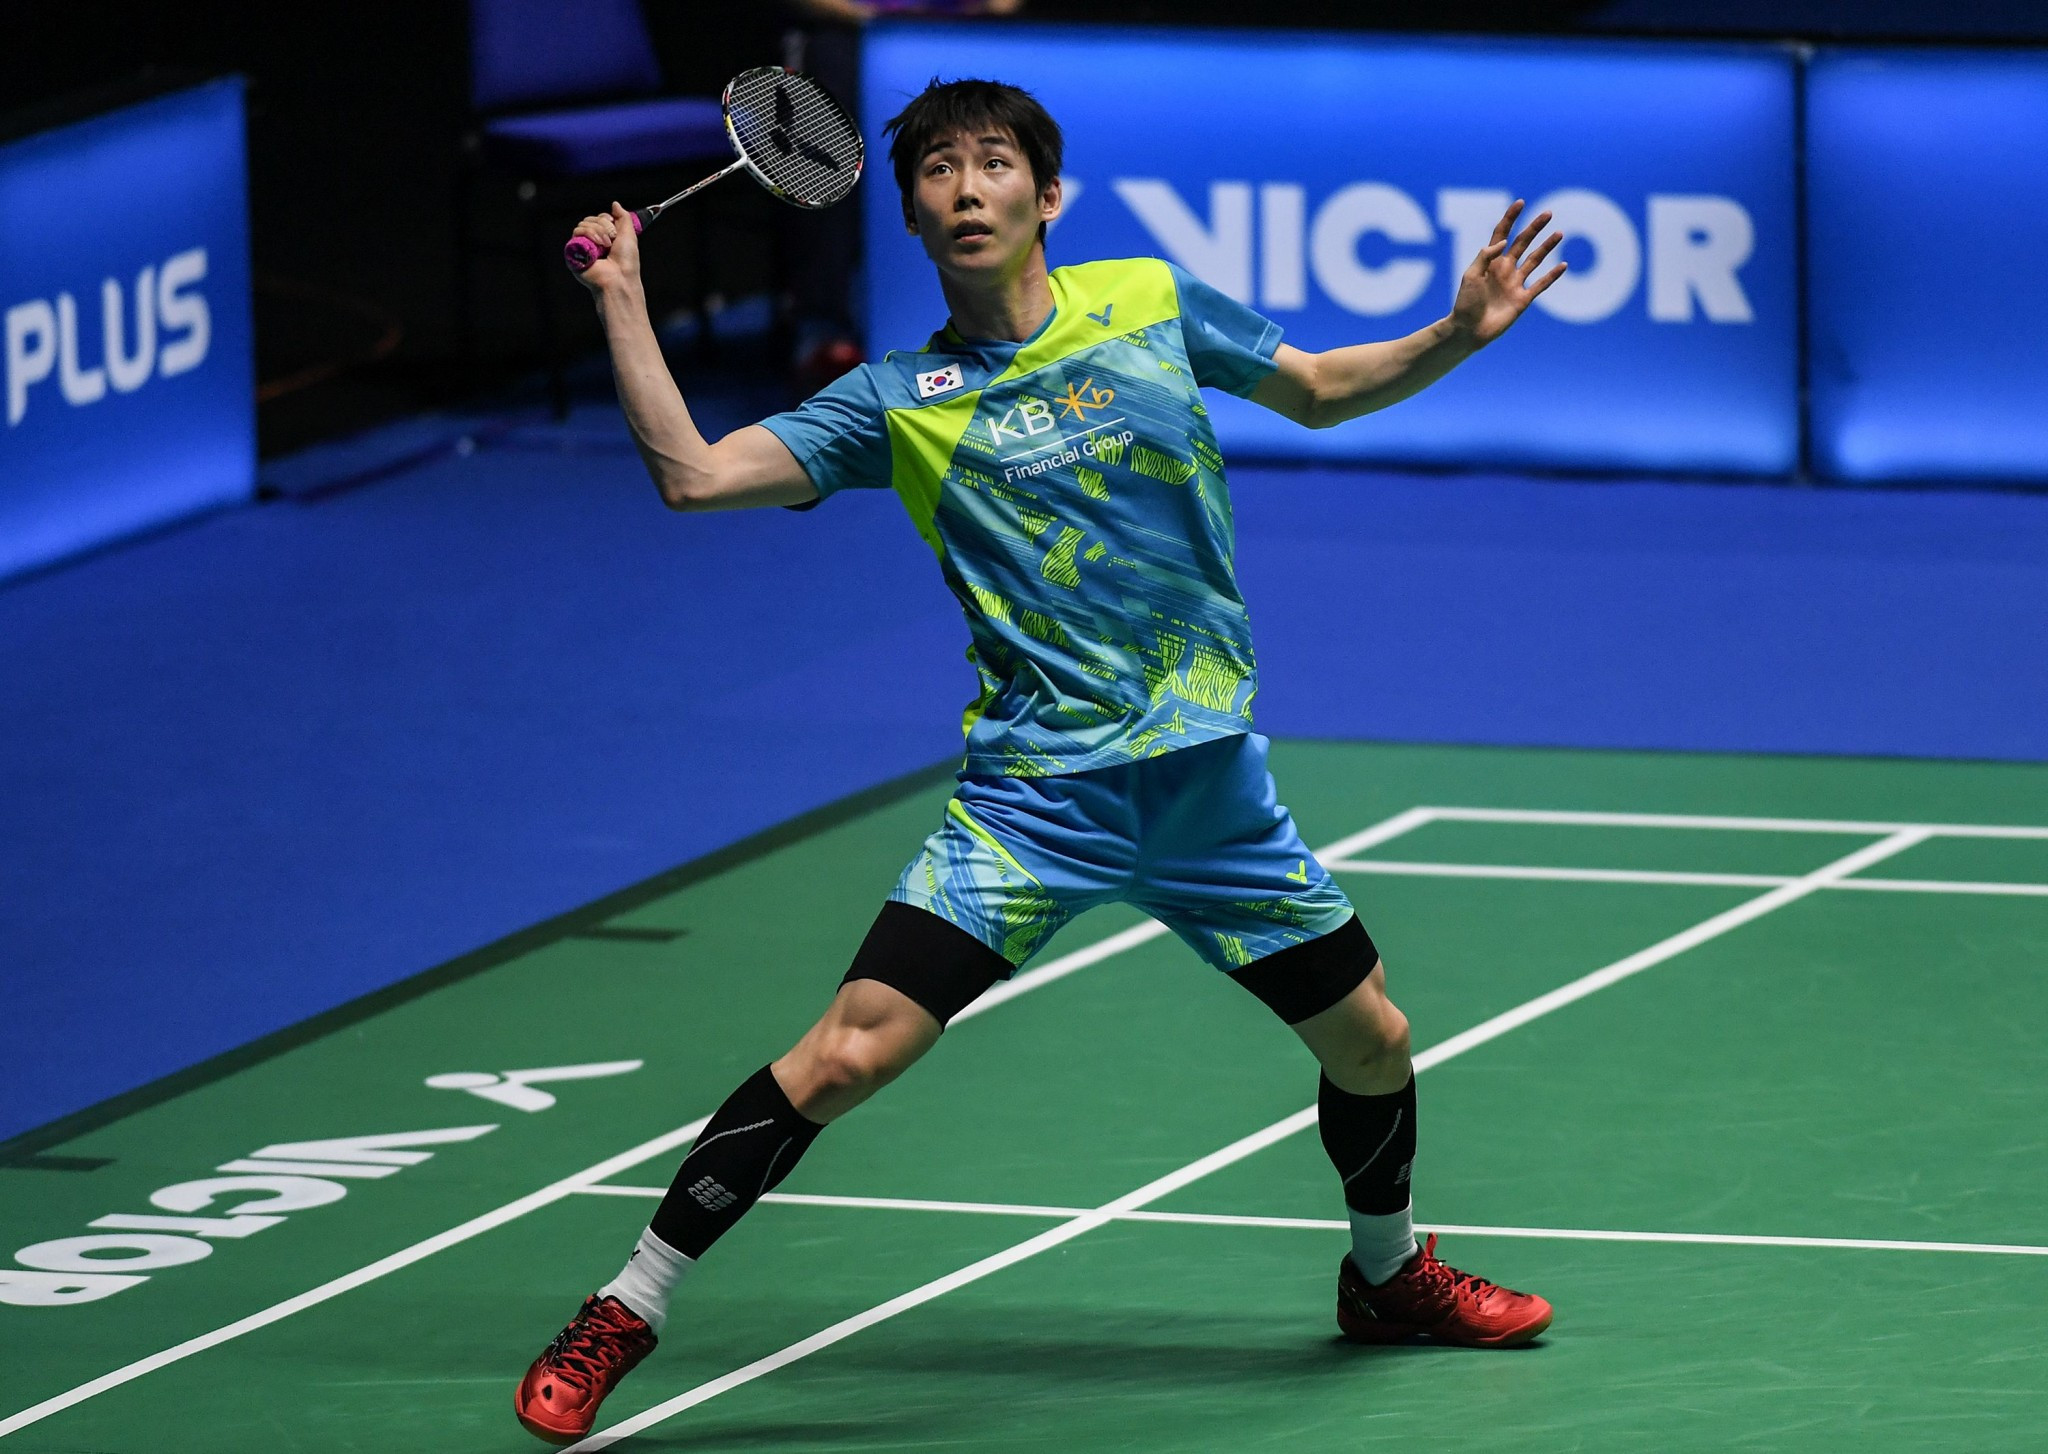 Son Wan-ho came through a tough second round encounter ©Getty Images